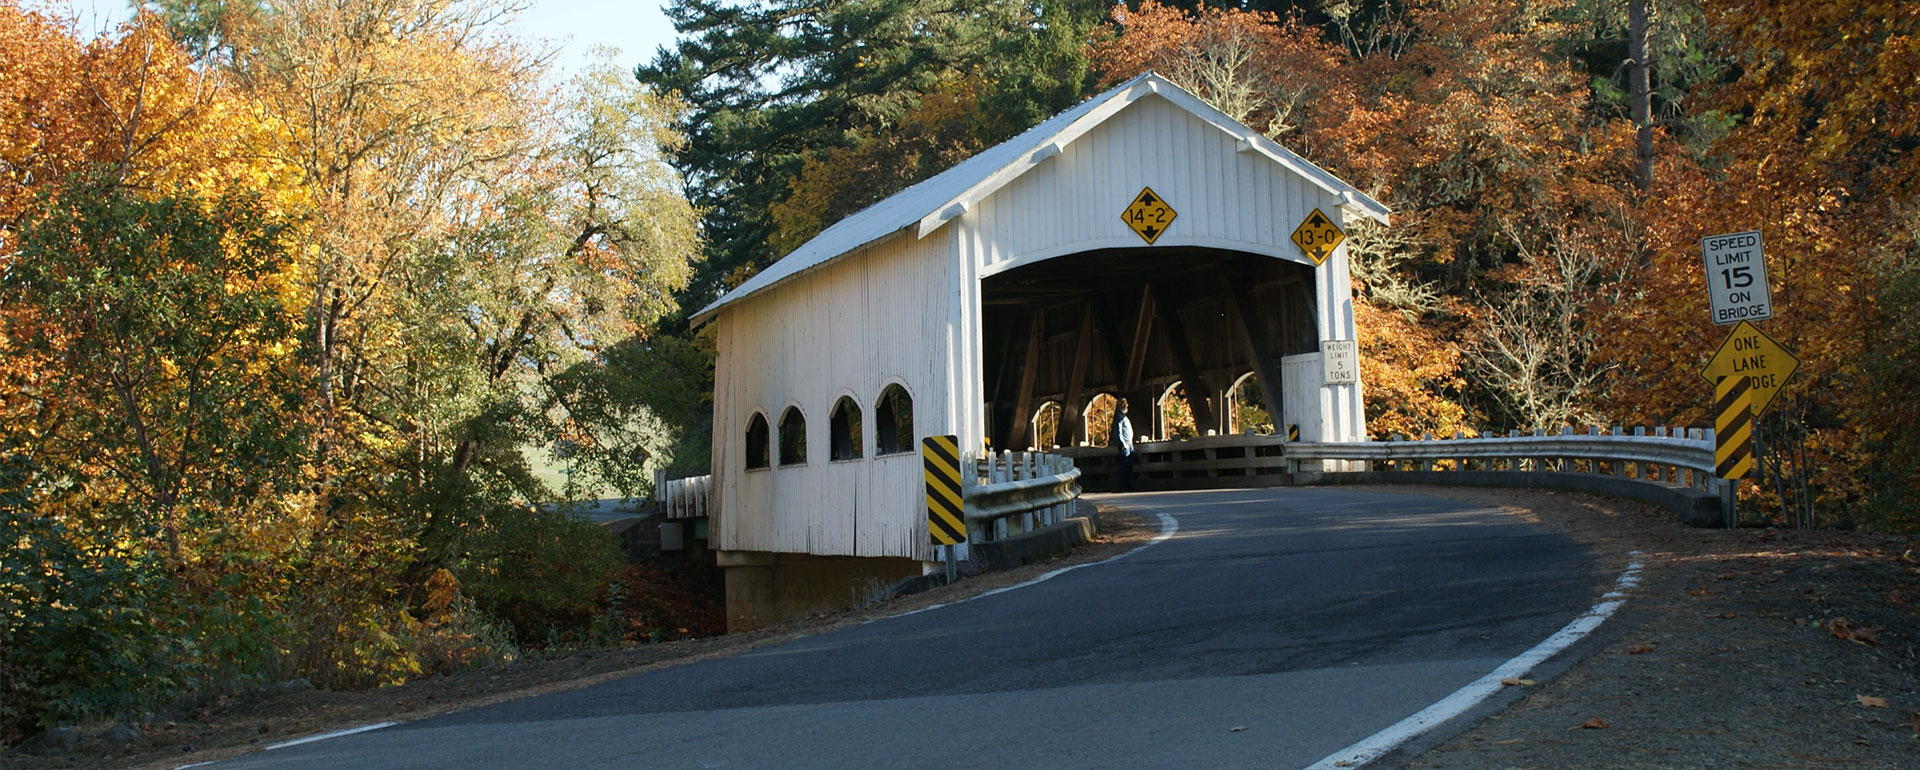 Image of a covered bridge